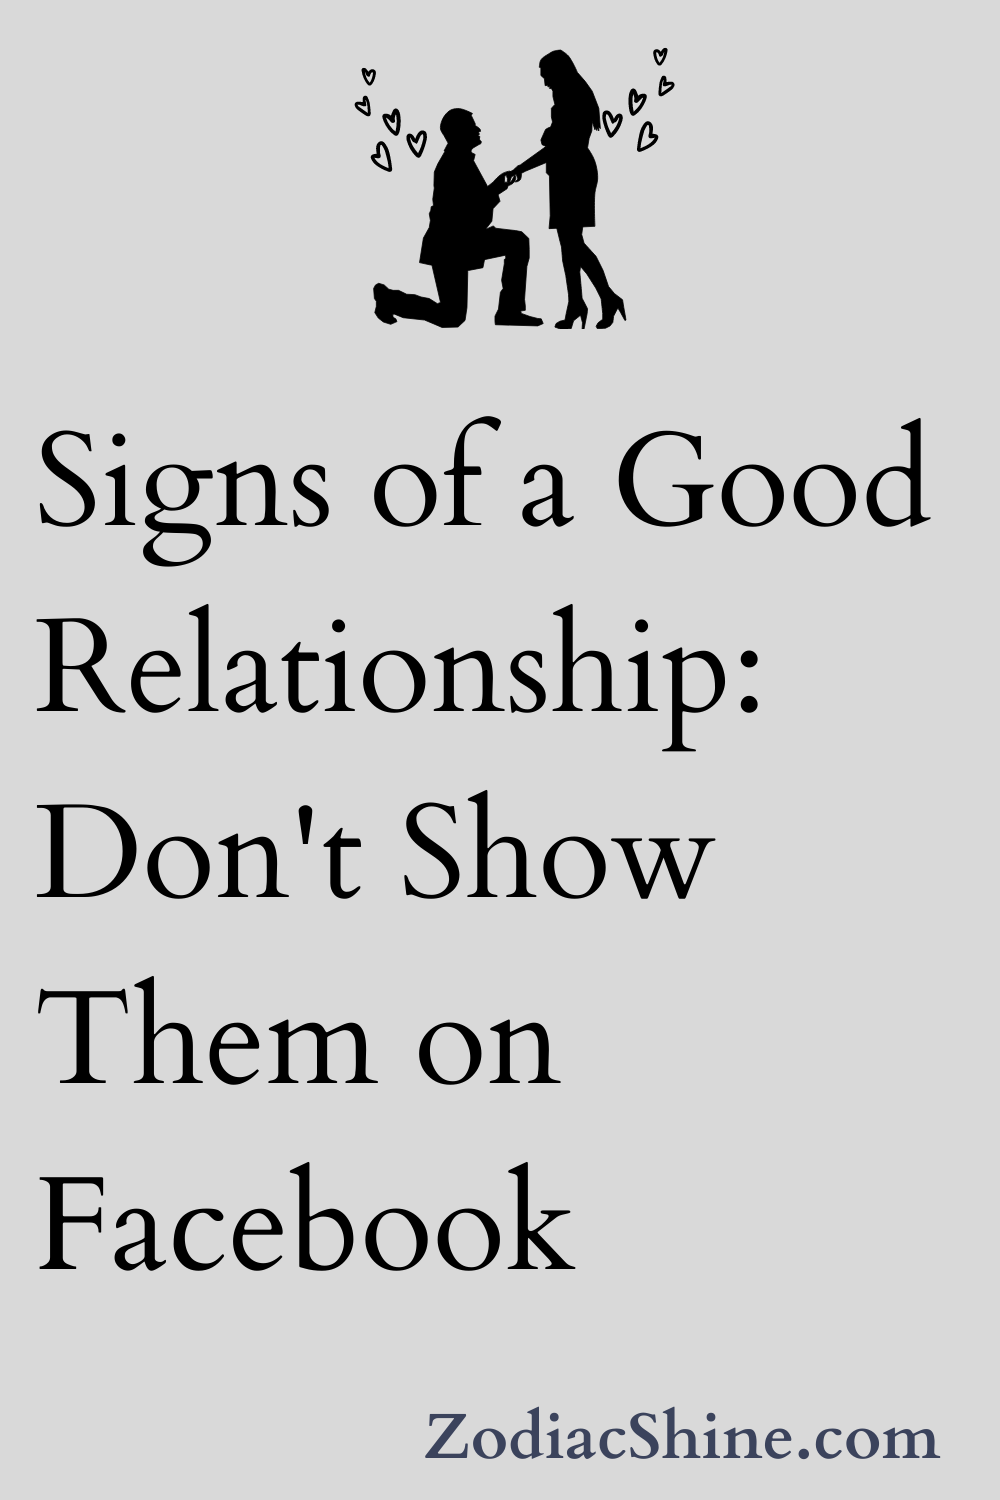 Signs of a Good Relationship: Don't Show Them on Facebook